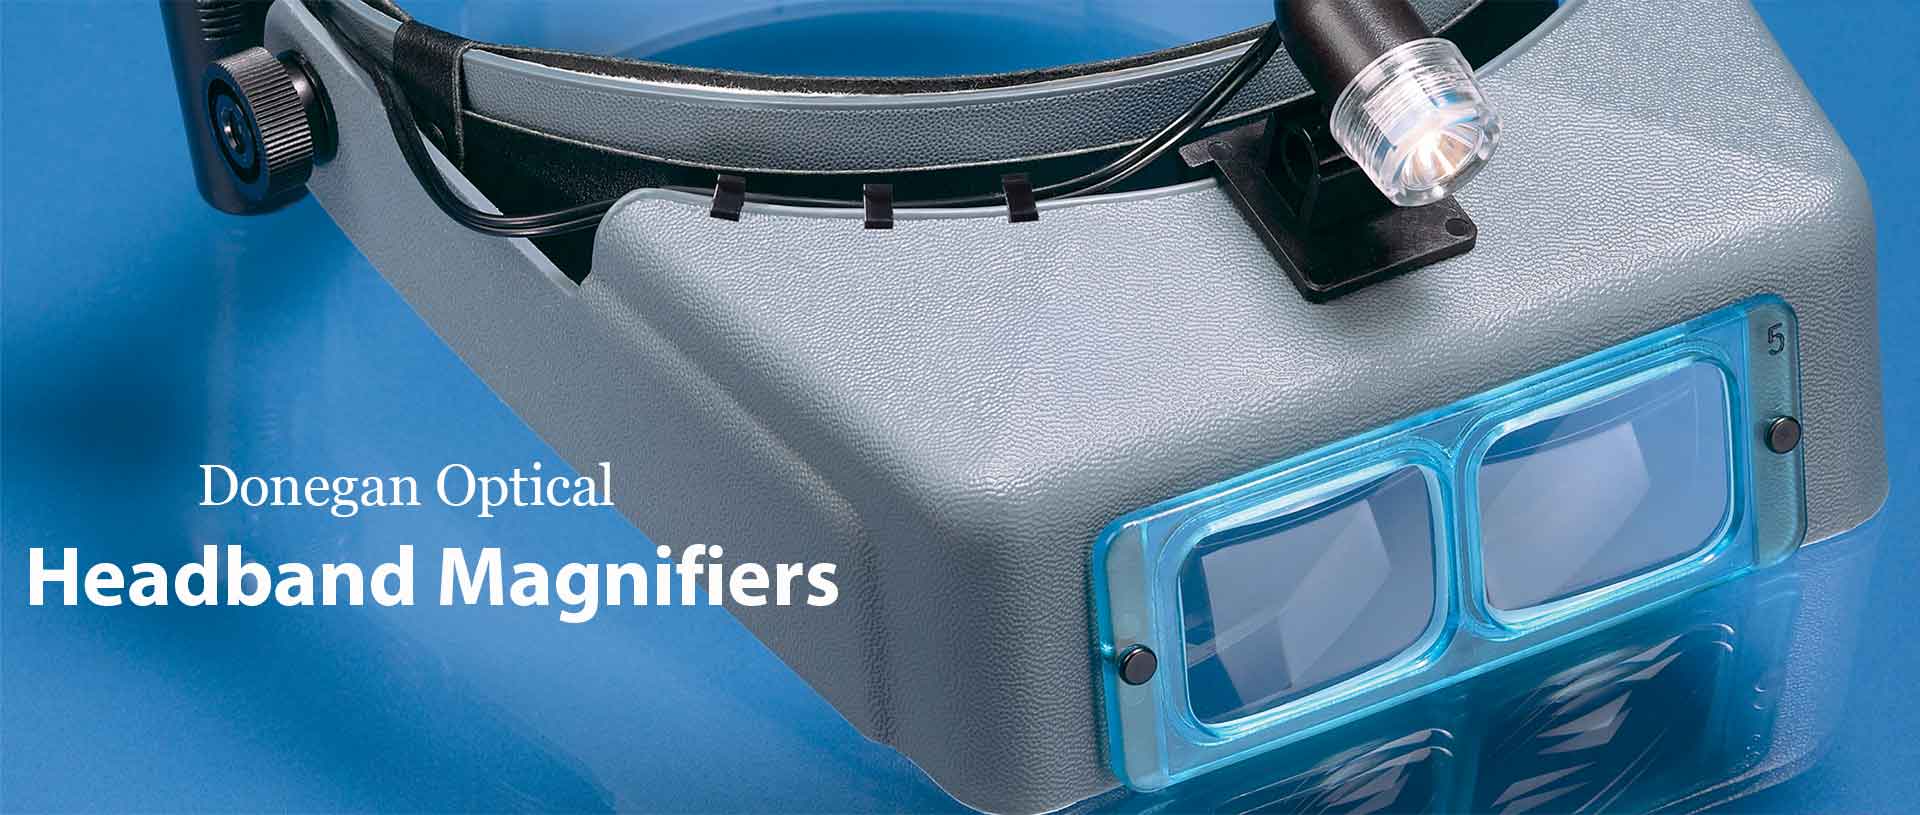 Headband Magnifiers : Magnifying Aids, Magnifiers, Magnifying Glasses, and  Independent Living Aids to help people with Macular Degeneration